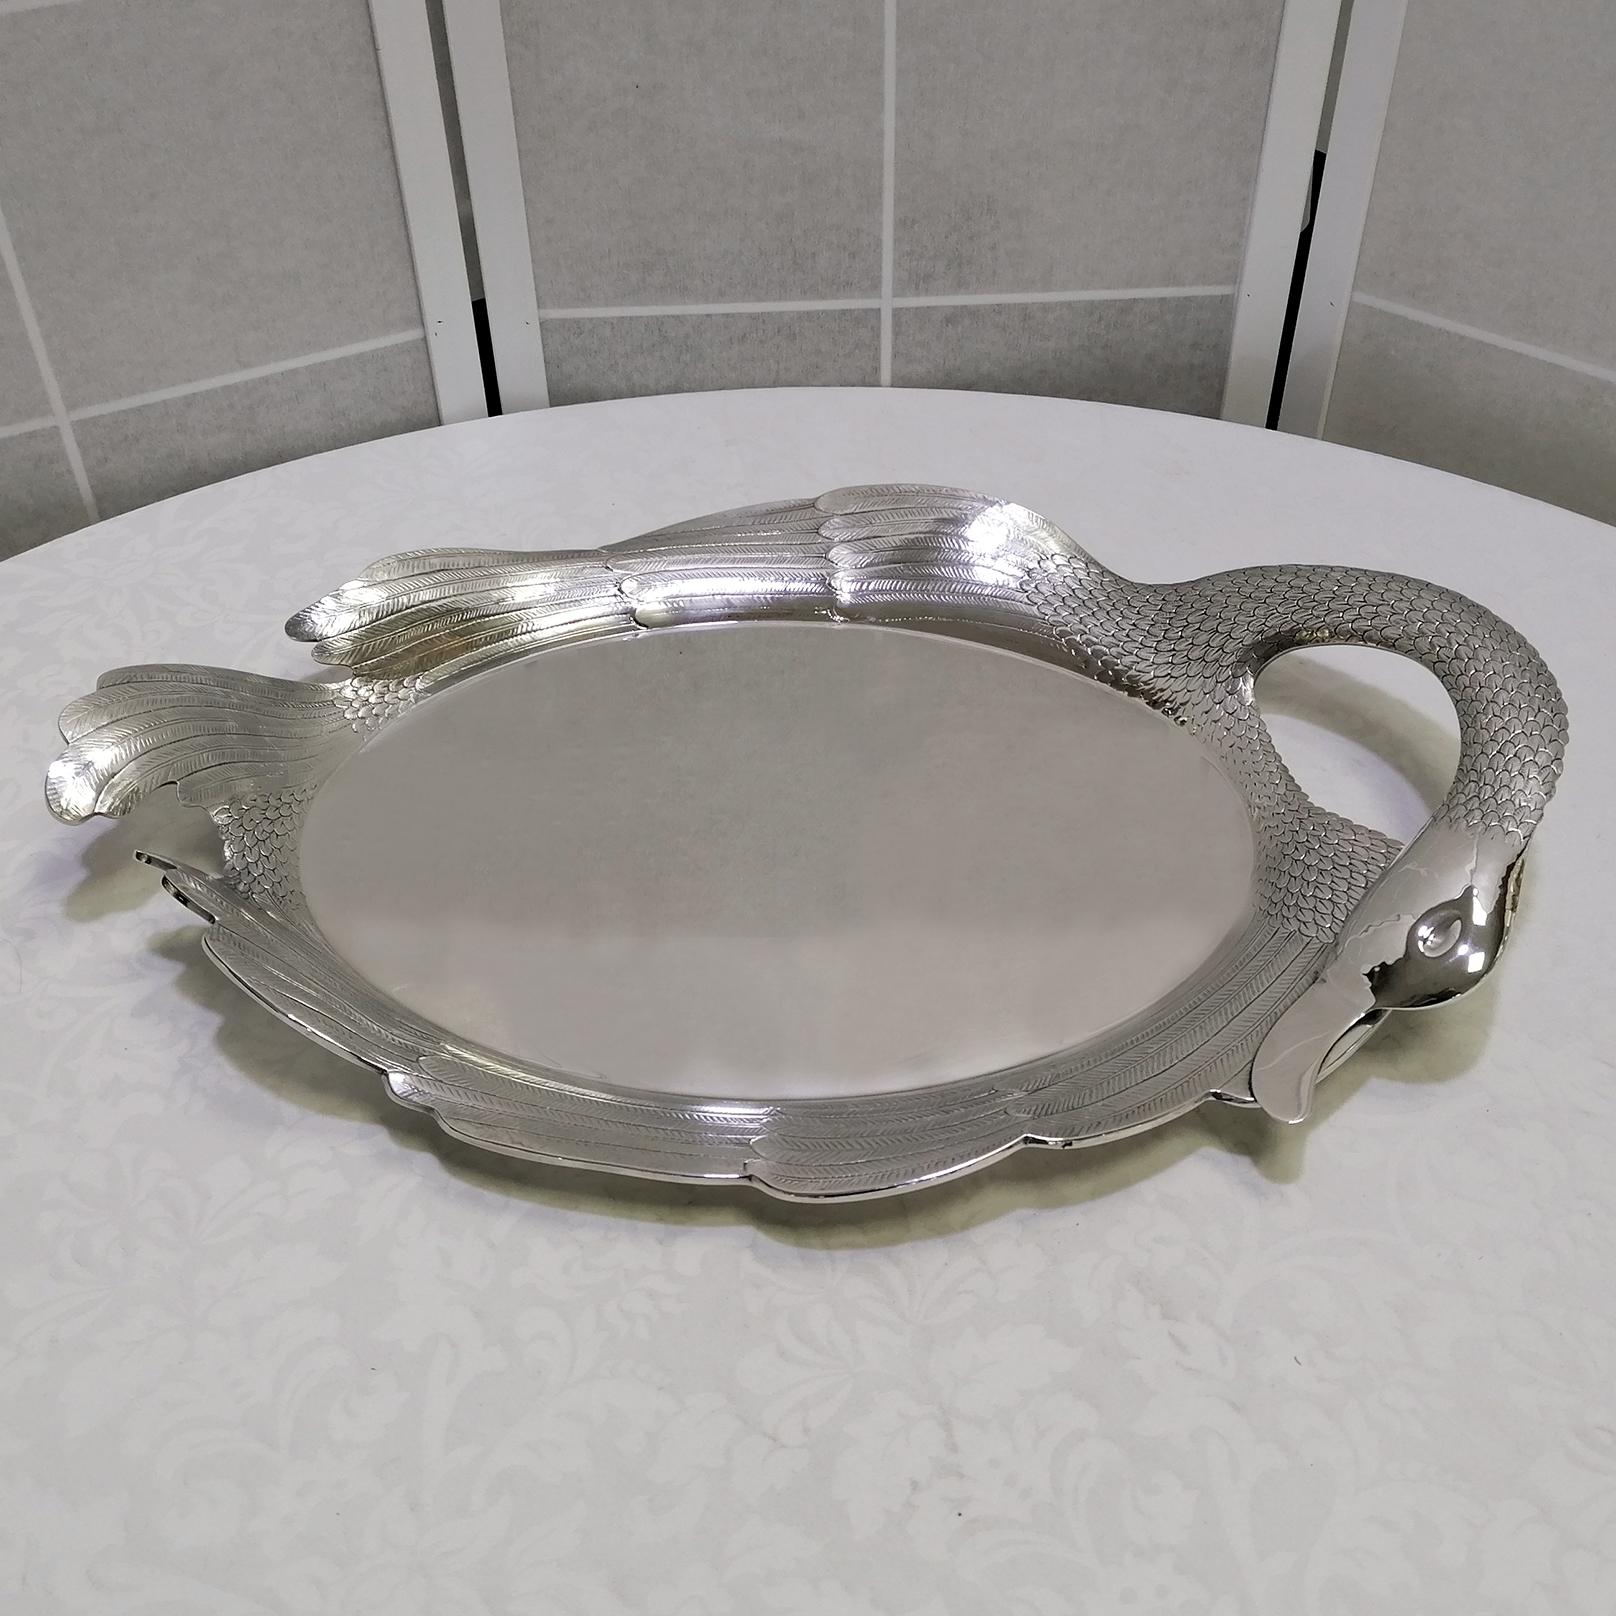 Unusual sterling silver tray in the shape of a swan.
Oval in shape, the central part is smooth and polished with pumice stone, while the edge has been embossed, chiseled and engraved.
The swan's head, folded back on itself, forms an opening where